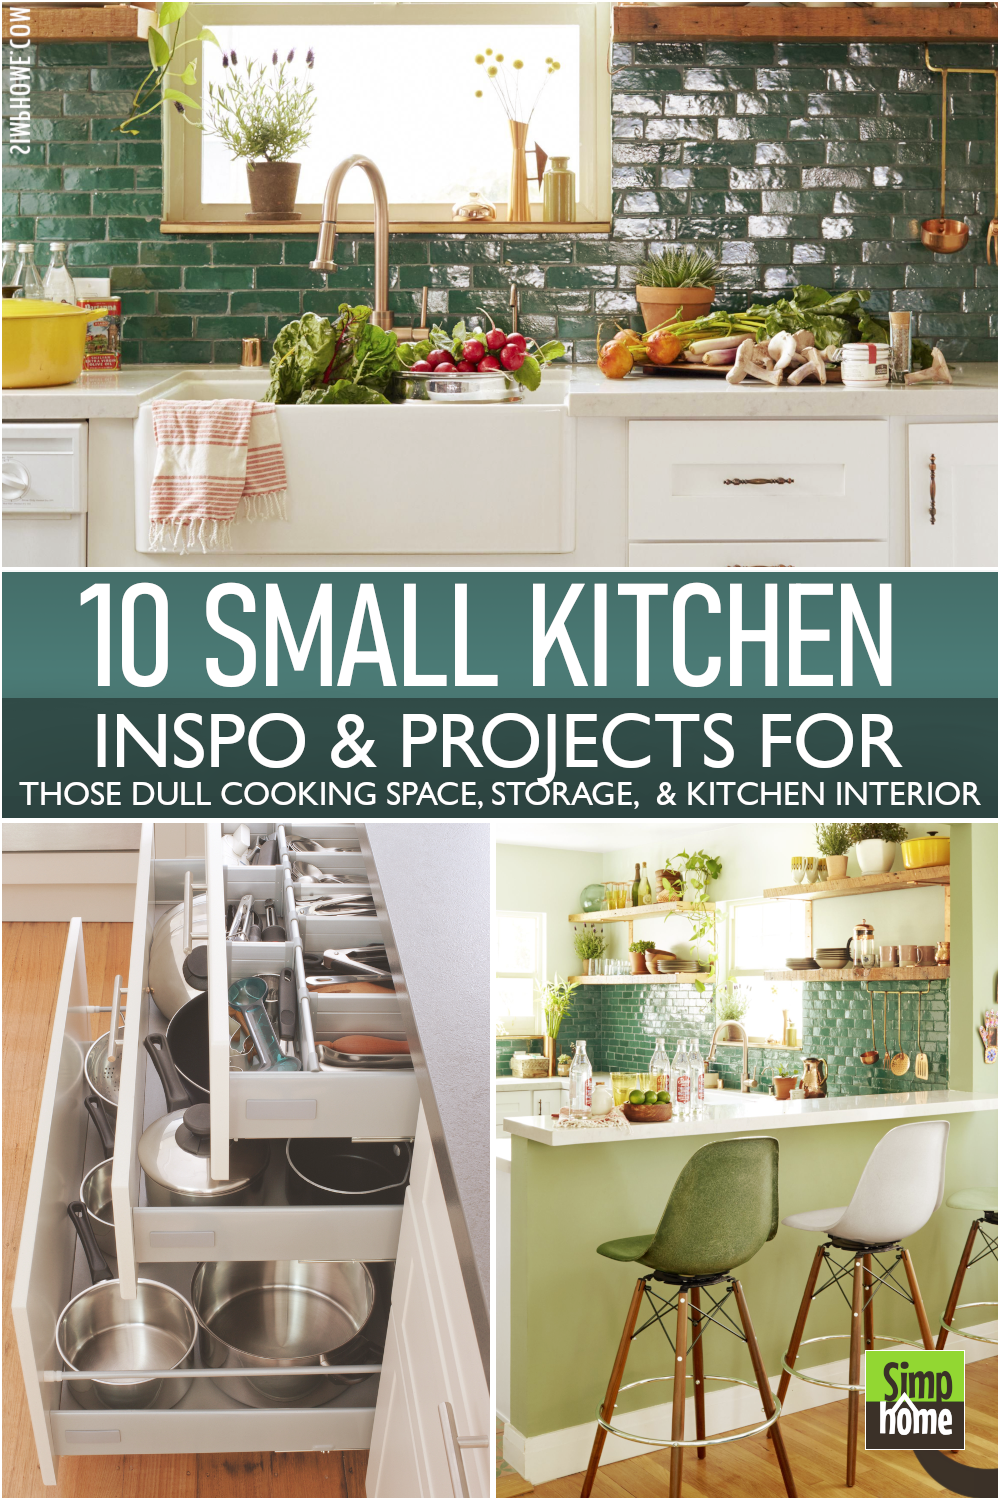 This is the Small kitchen inspo via Simphome.com